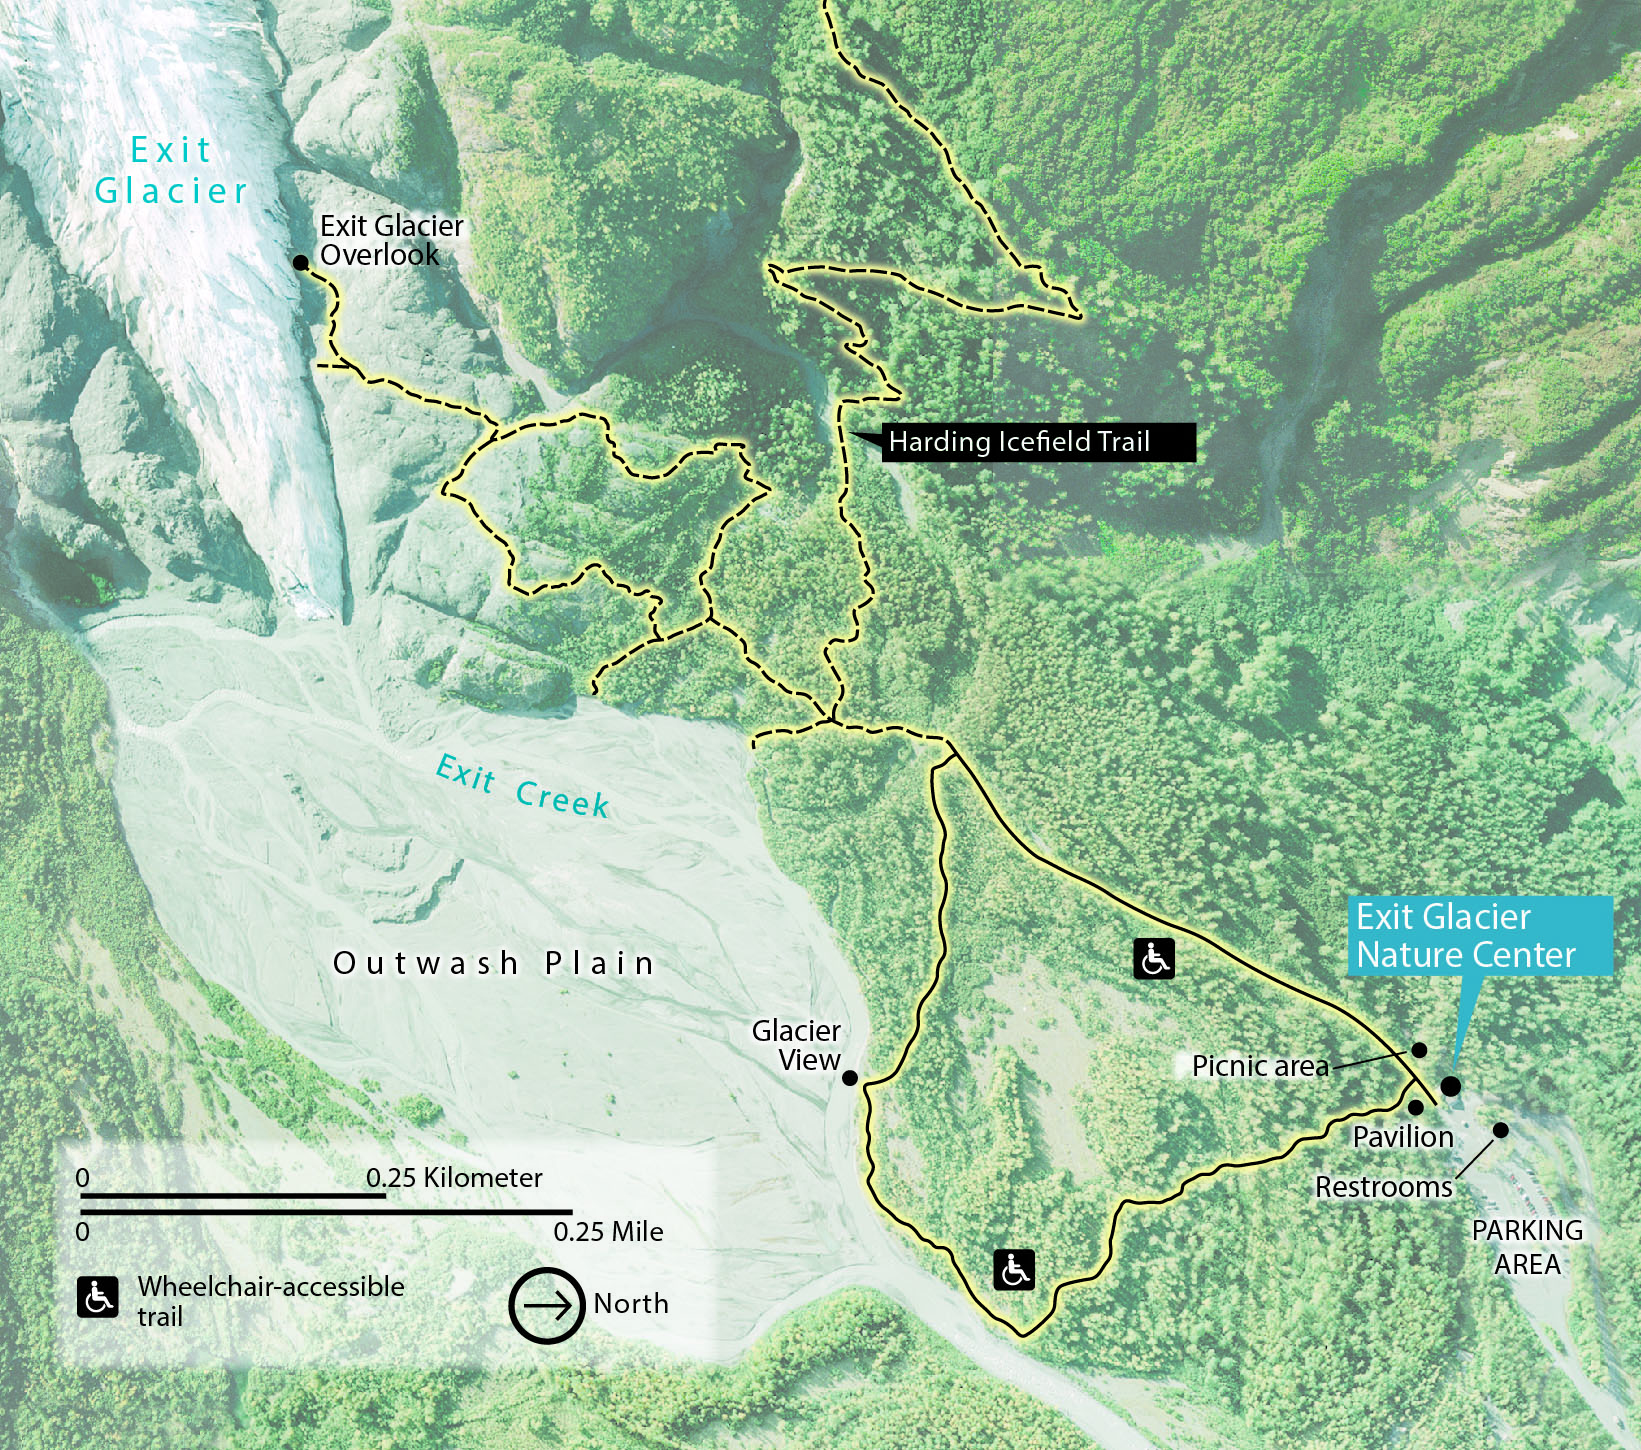 Map Of The Exit Glacier Area, Including Trails, Restrooms, Nature Center, And Parking Lot, As Described In The Text. - Map of the Exit Glacier Area, including trails, restrooms, nature center, and parking lot, as described in the text.